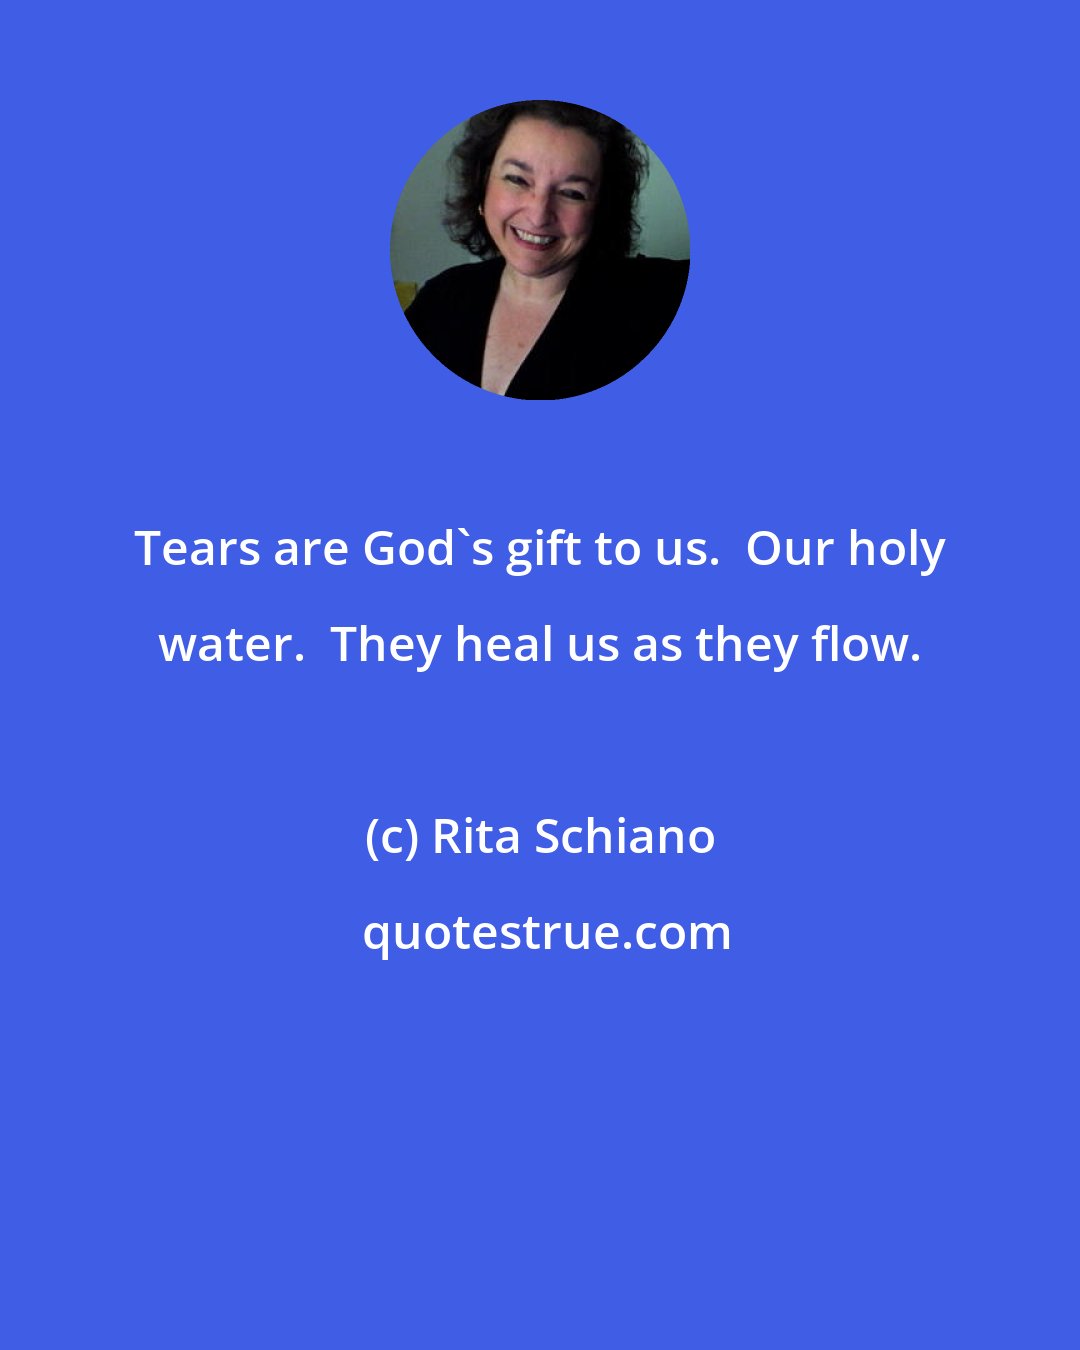 Rita Schiano: Tears are God's gift to us.  Our holy water.  They heal us as they flow.